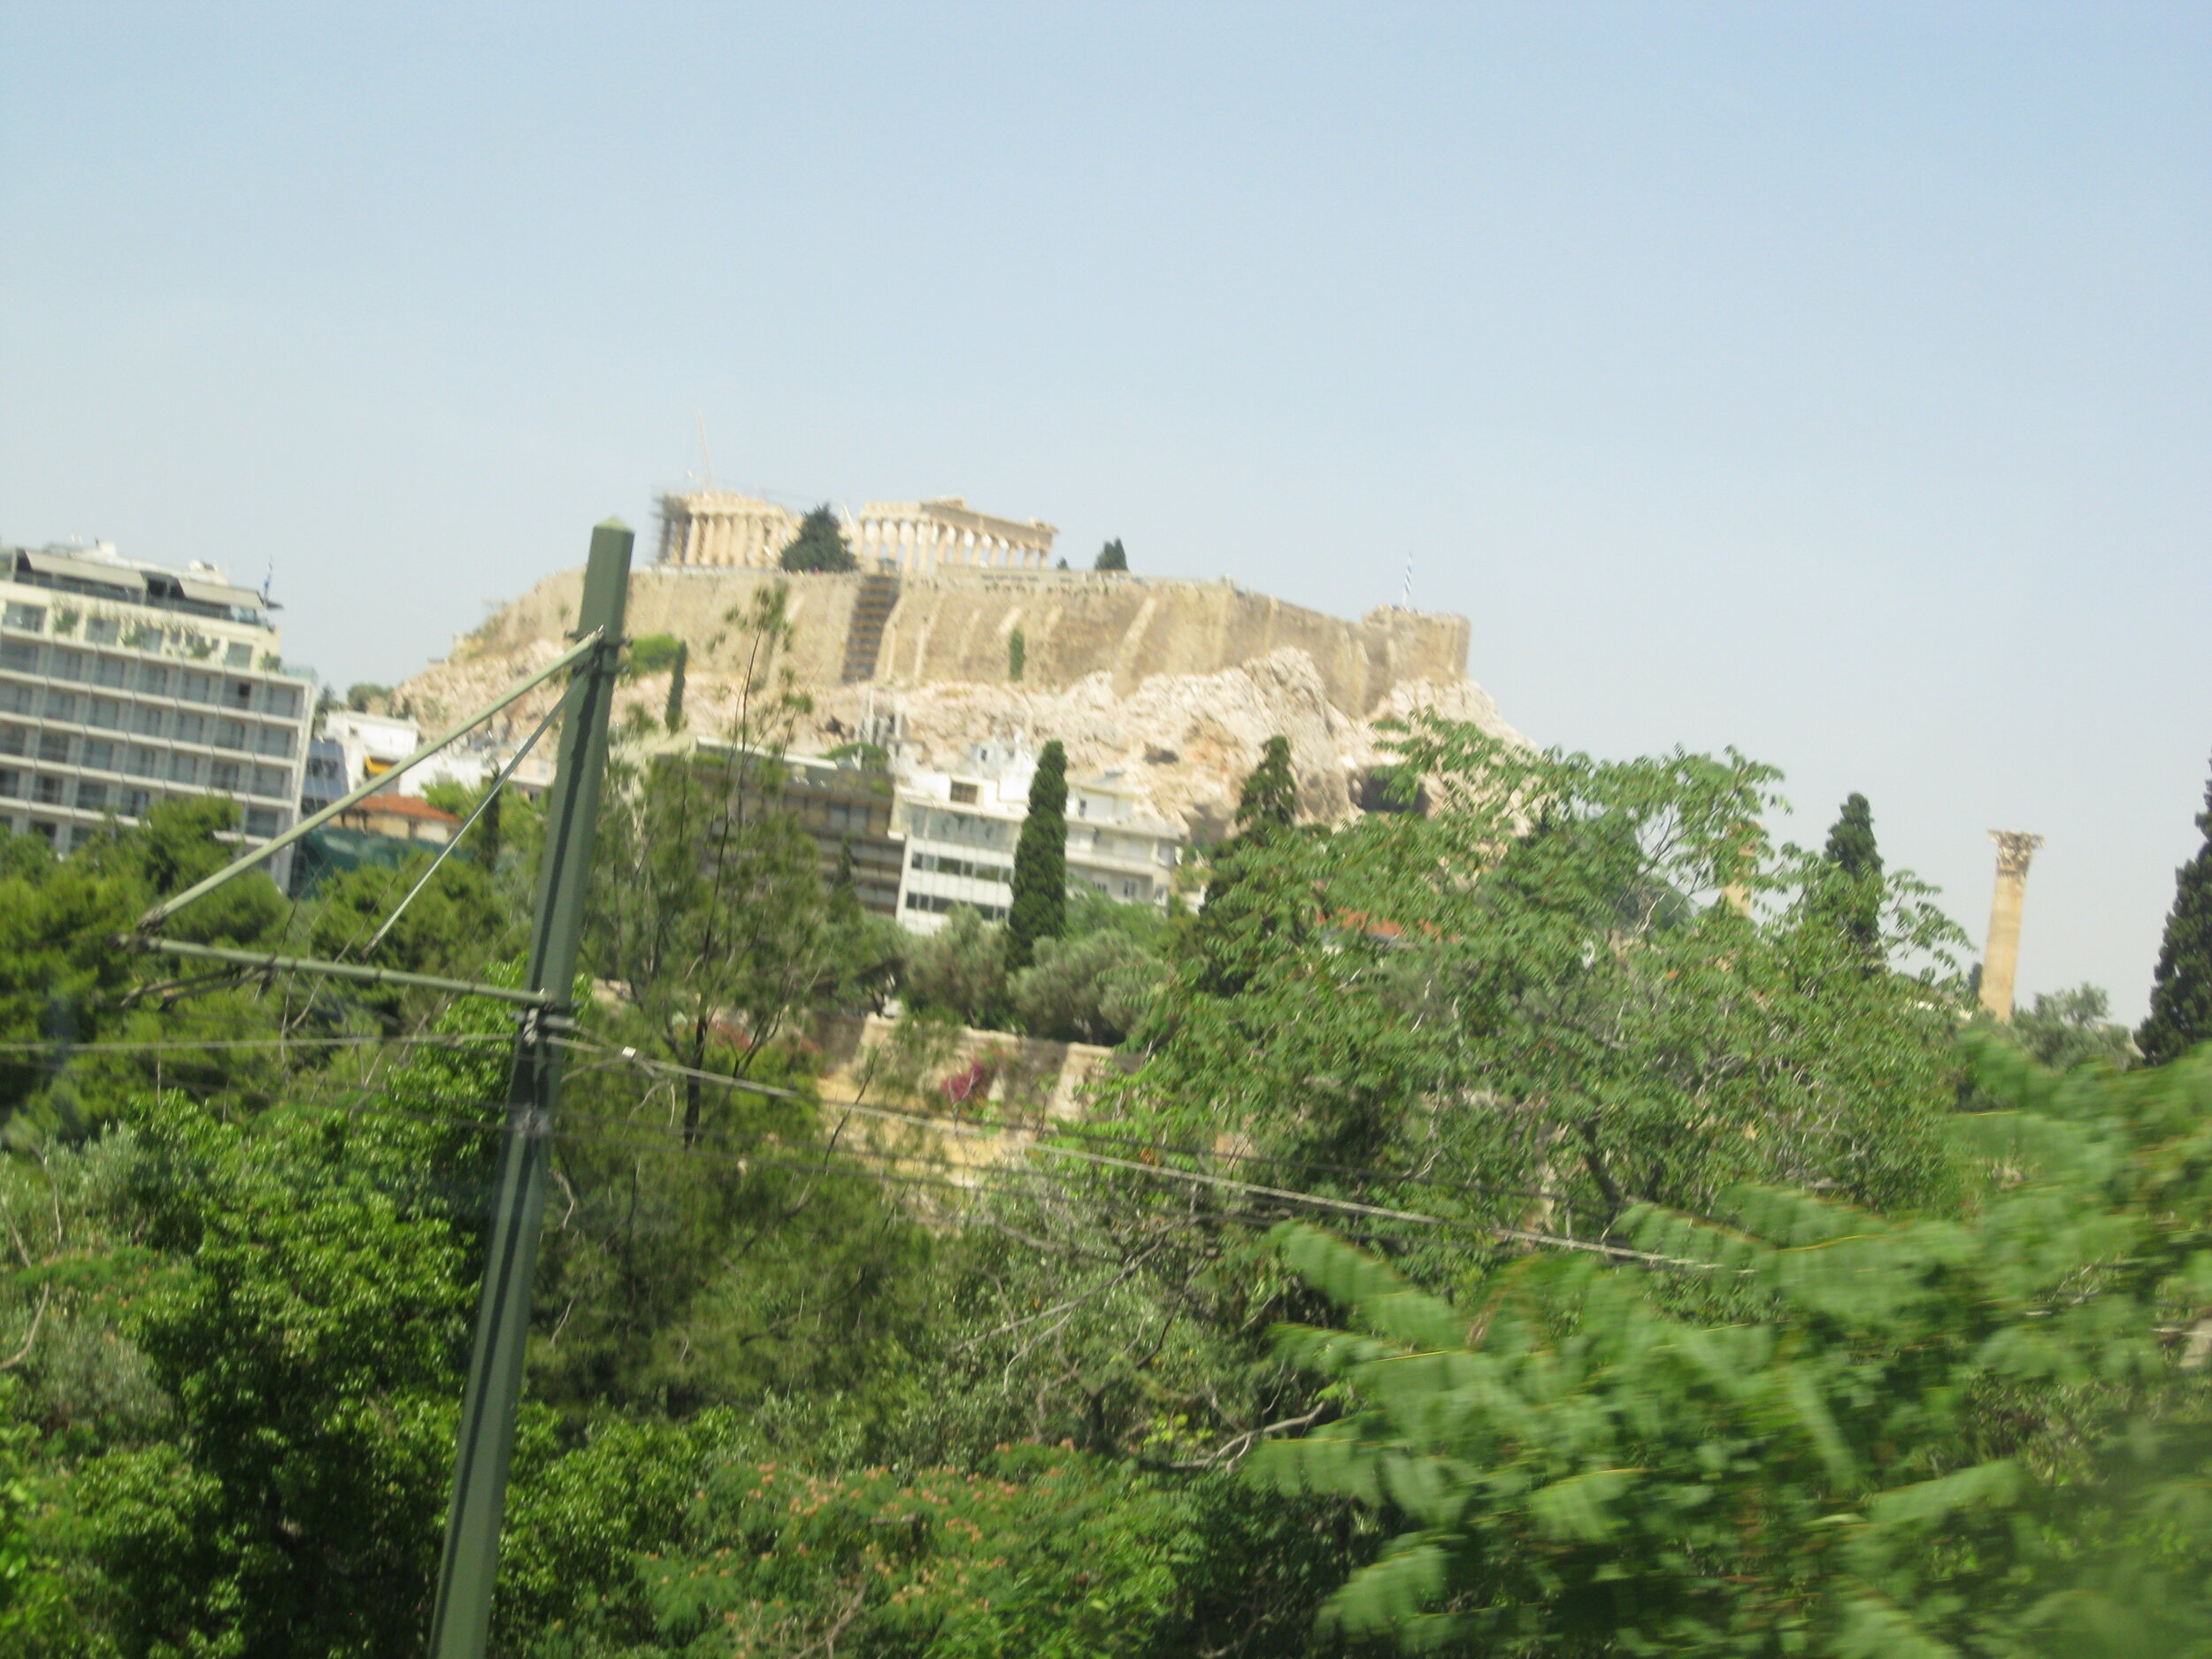  The Parthenon is seated on top of a hill. 